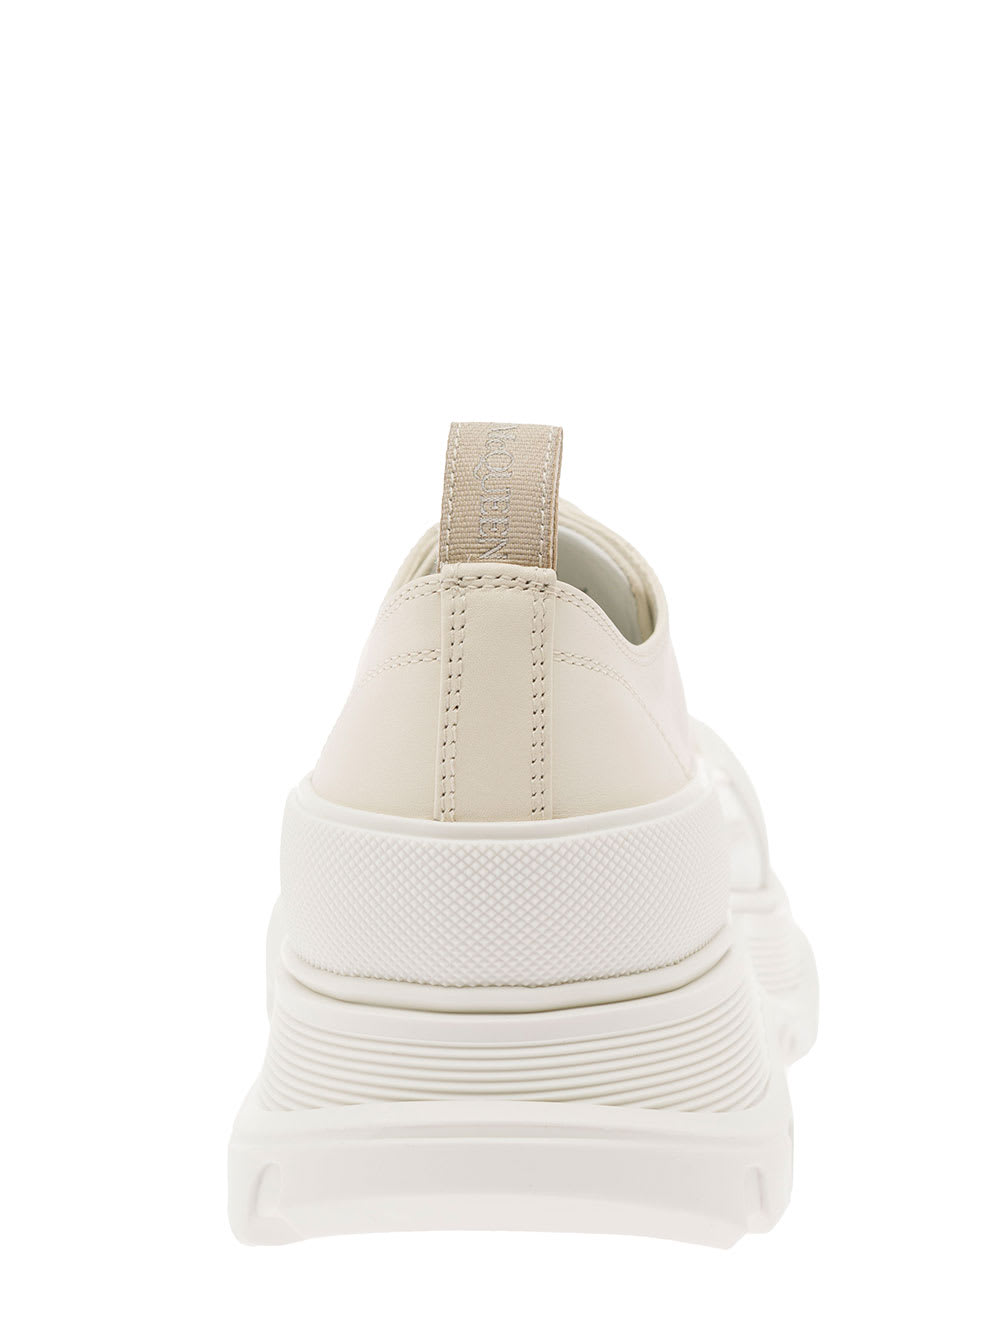 Shop Alexander Mcqueen White And Beige Tread Slick Sneakers In Calf Leather